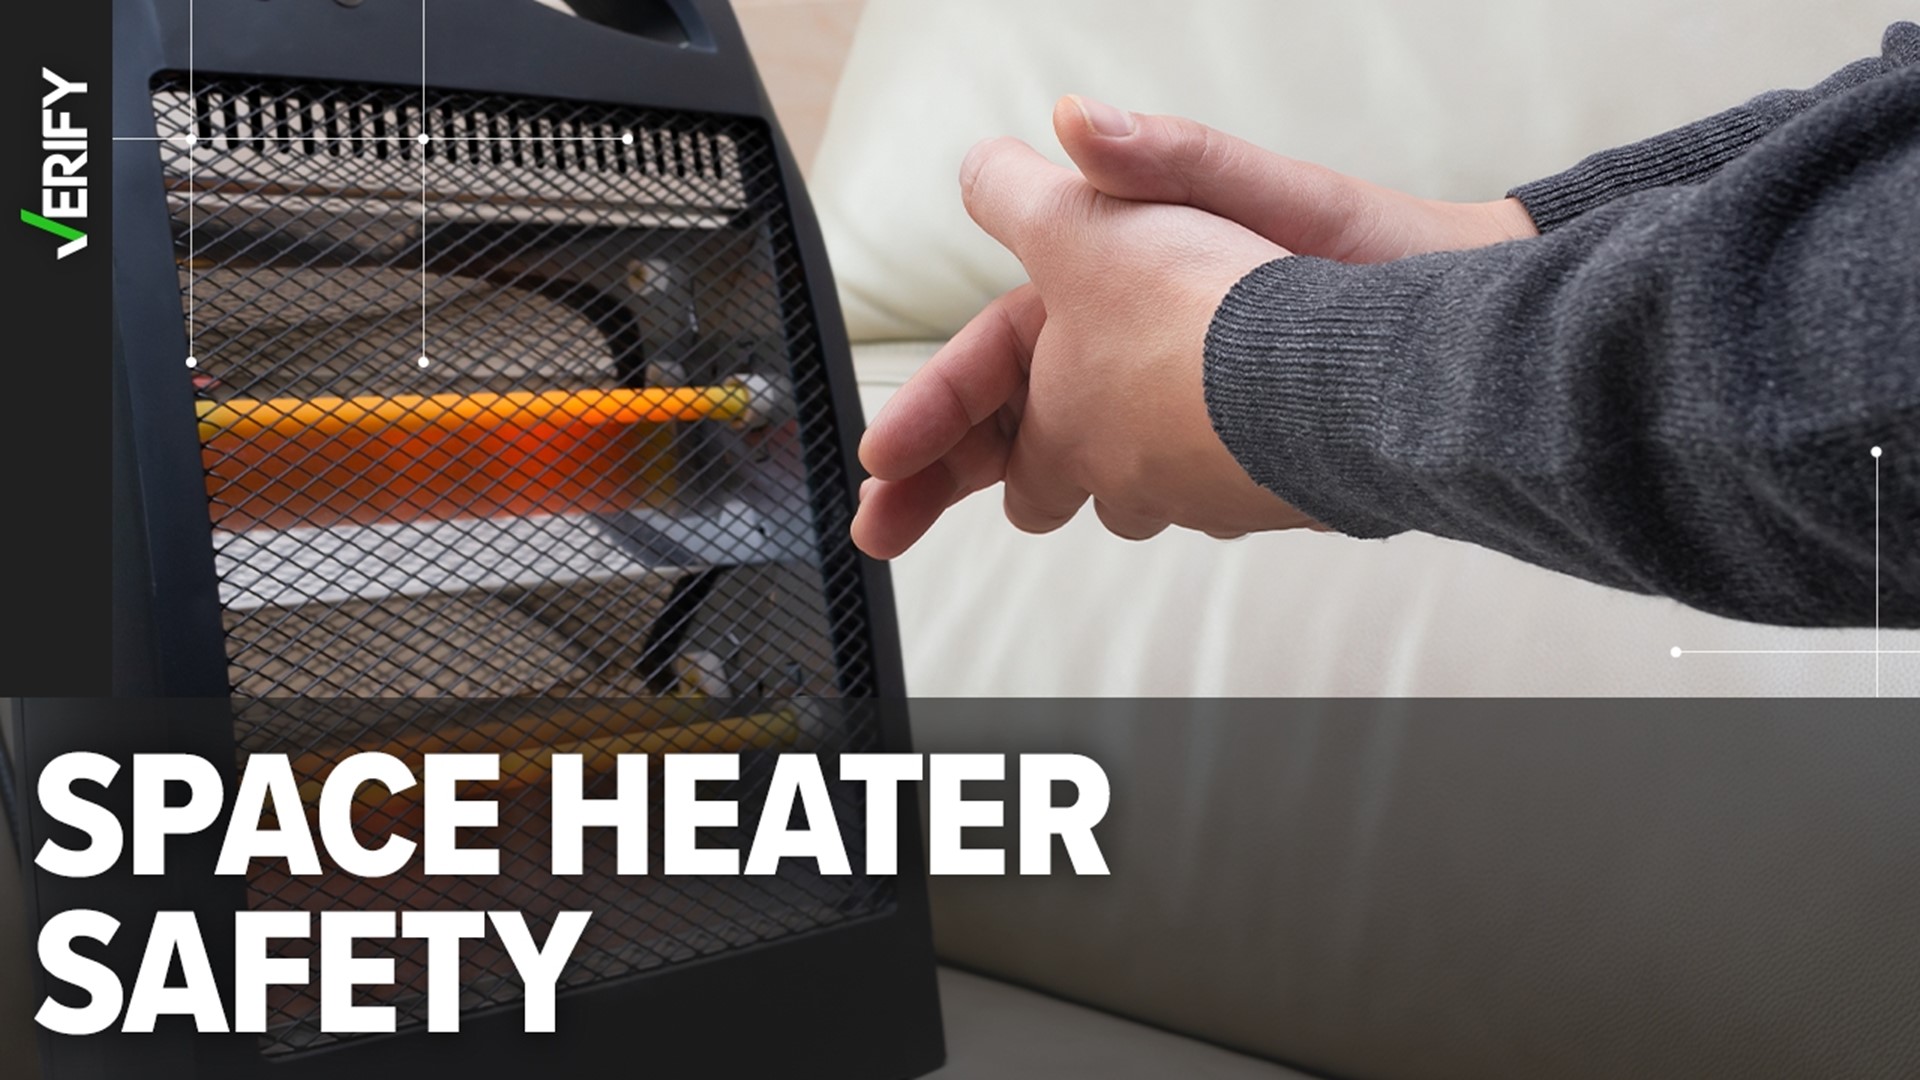 Safety experts say it’s unsafe to plug a space heater into an extension cord or power strip. It’s not safe to leave a space heater on overnight, either.